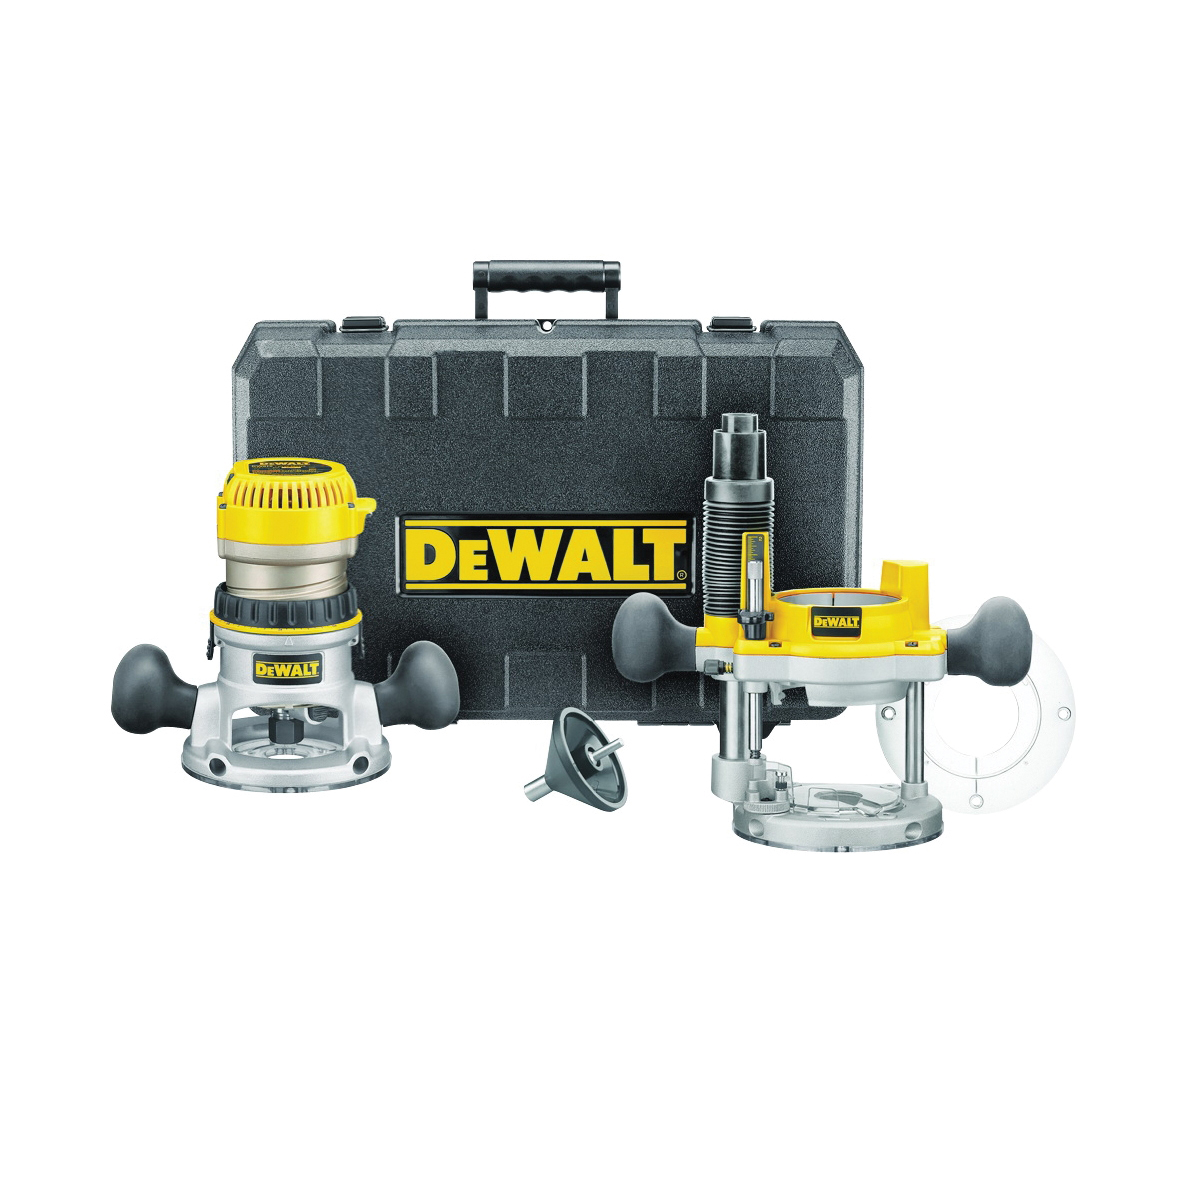 DW618PK Fixed Base Router Combination Kit, 12 A, 8000 to 24,000 rpm Load Speed, 2-1/2 in Max Stroke